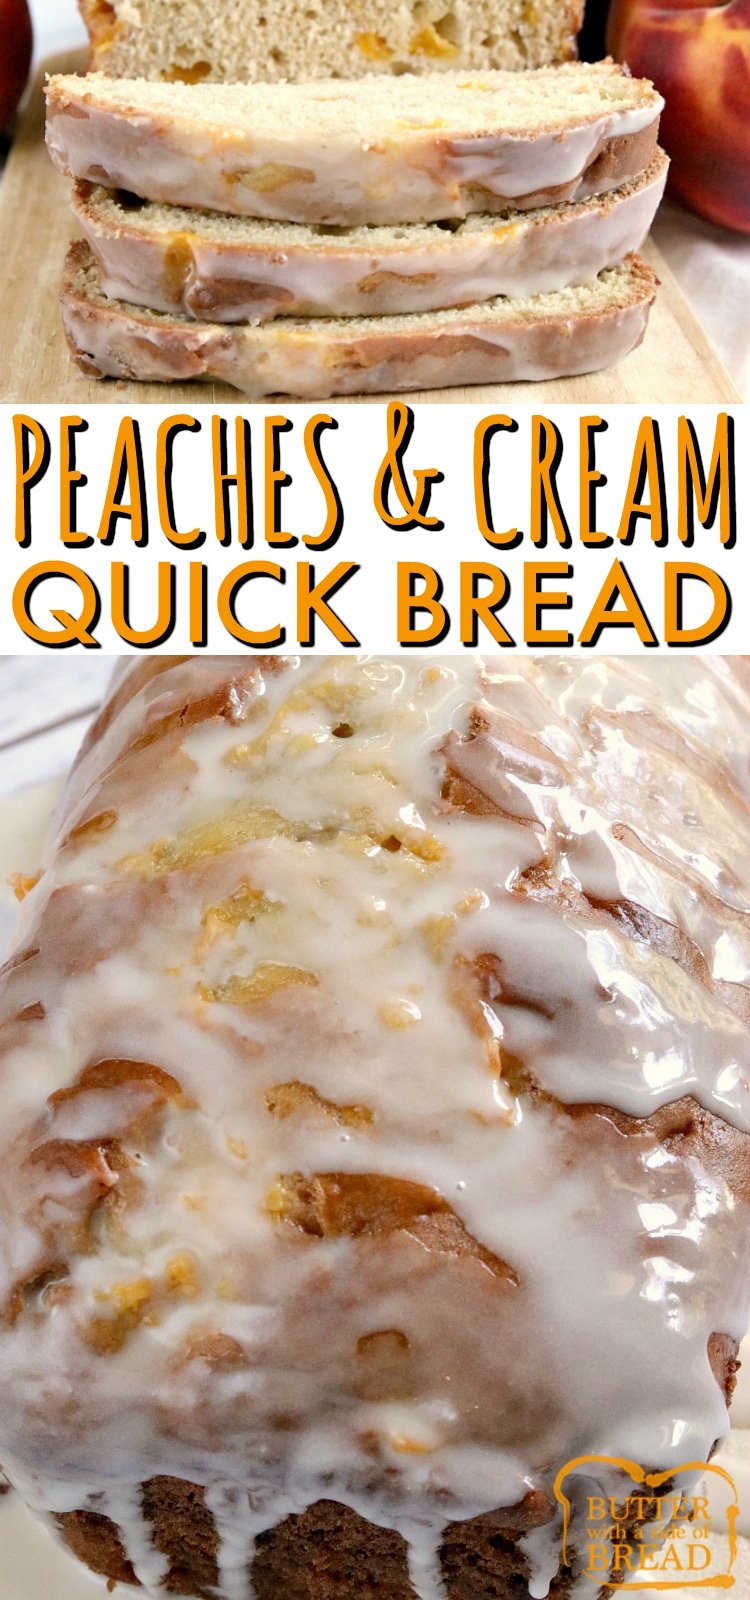 Peaches and Cream Bread is an easy quick bread that is moist, sweet, full of fresh peaches, and then topped with a simple vanilla glaze. This easy bread recipe is a great way to use up all of those peaches that are so delicious right now!